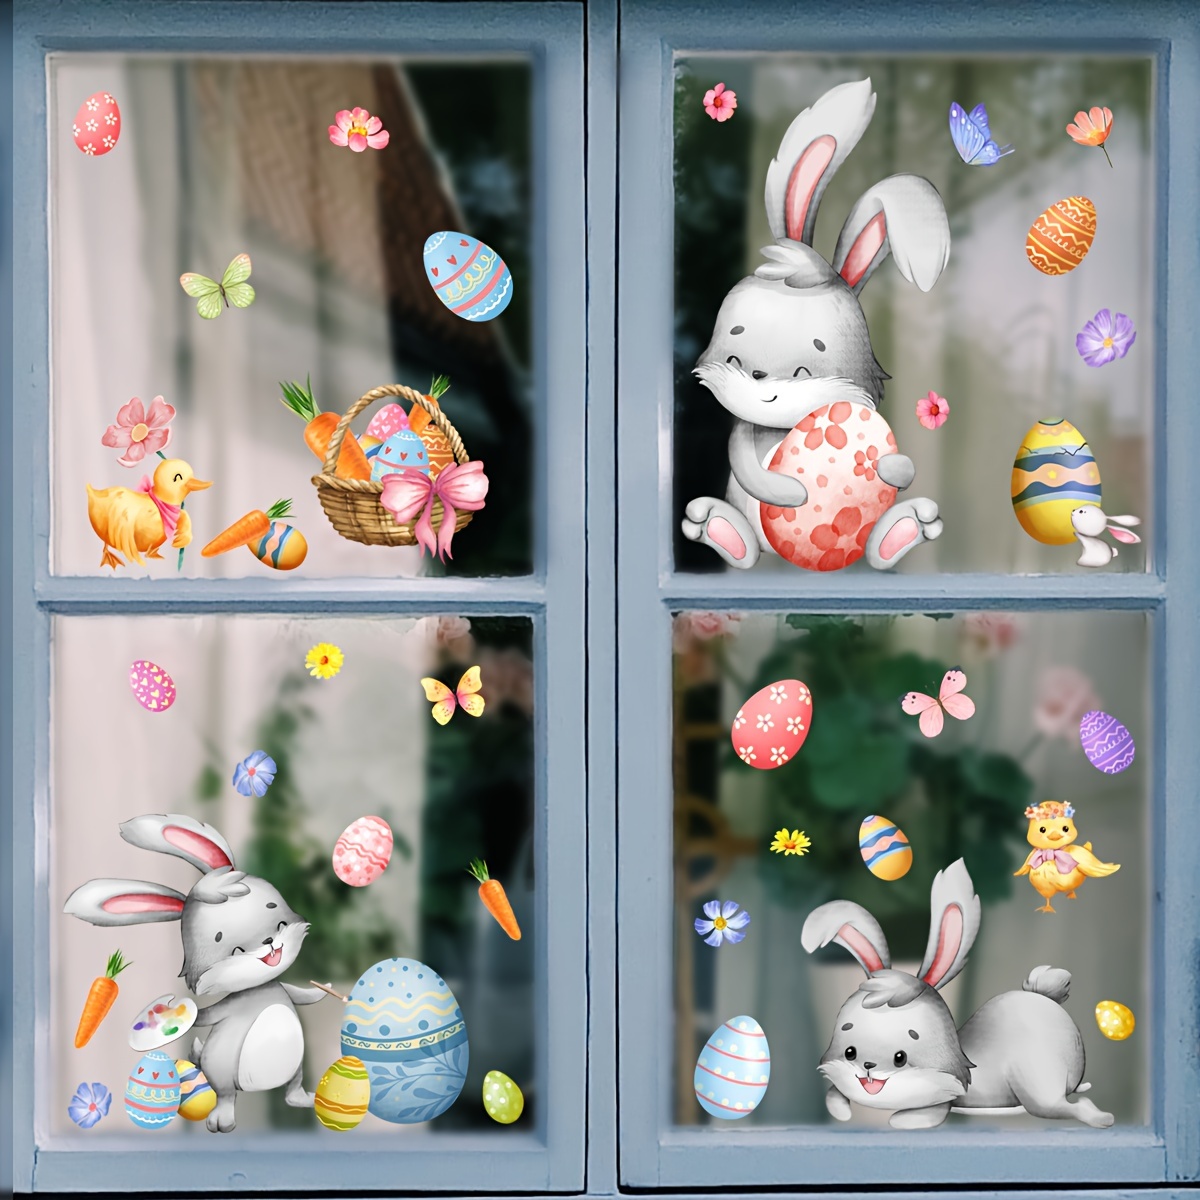 

Set Of 3 Electrostatic Glass Window Sticker, Cartoon Animal Rabbit Carrot Easter Egg Pattern Window Clings Stickers, Bedroom Living Room Home Shopping Mall Decoration Stickers, Removable Stickers